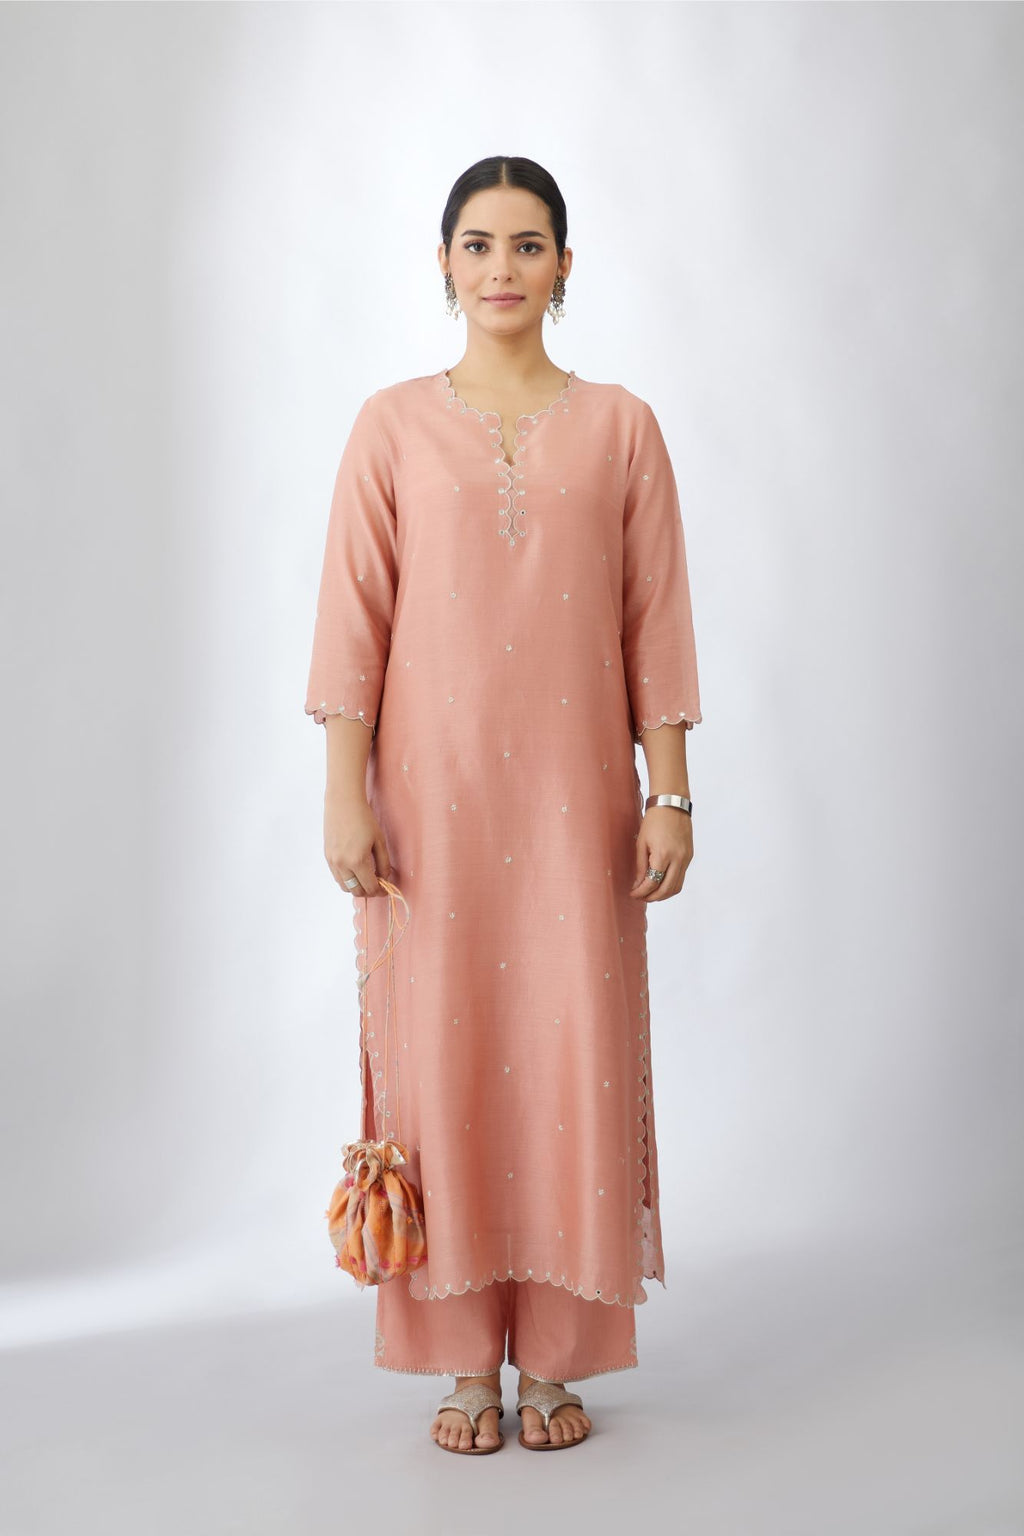 Salmon silk chanderi straight kurta set with delicate all-over silver zari flowers and scalloped edges, highlighted with hand attached mirrors.